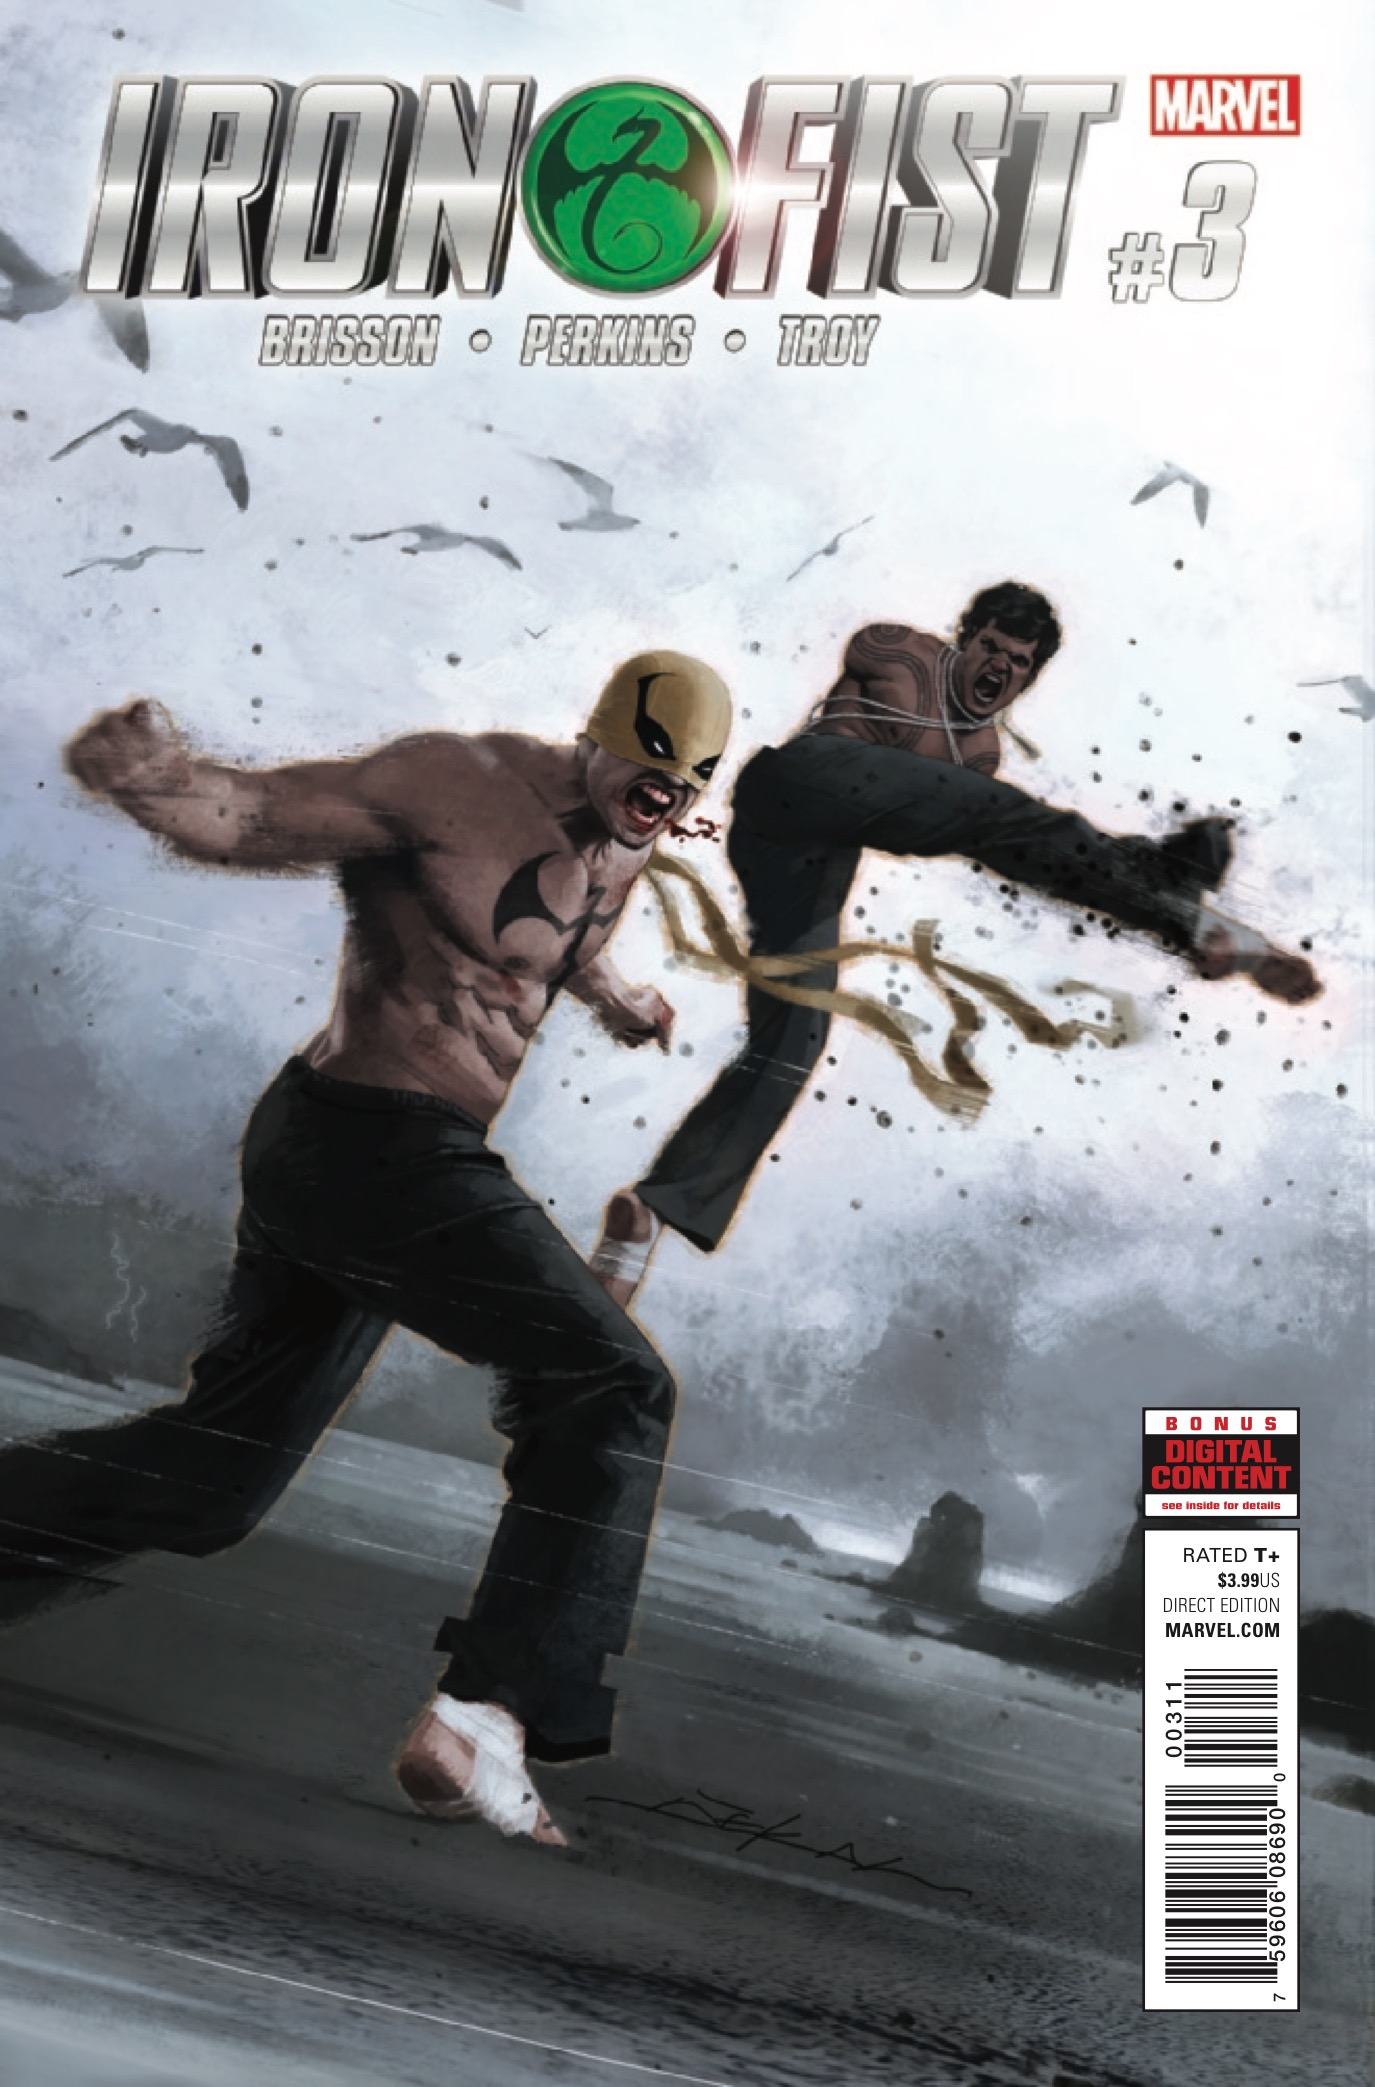 Marvel Preview: Iron Fist #3